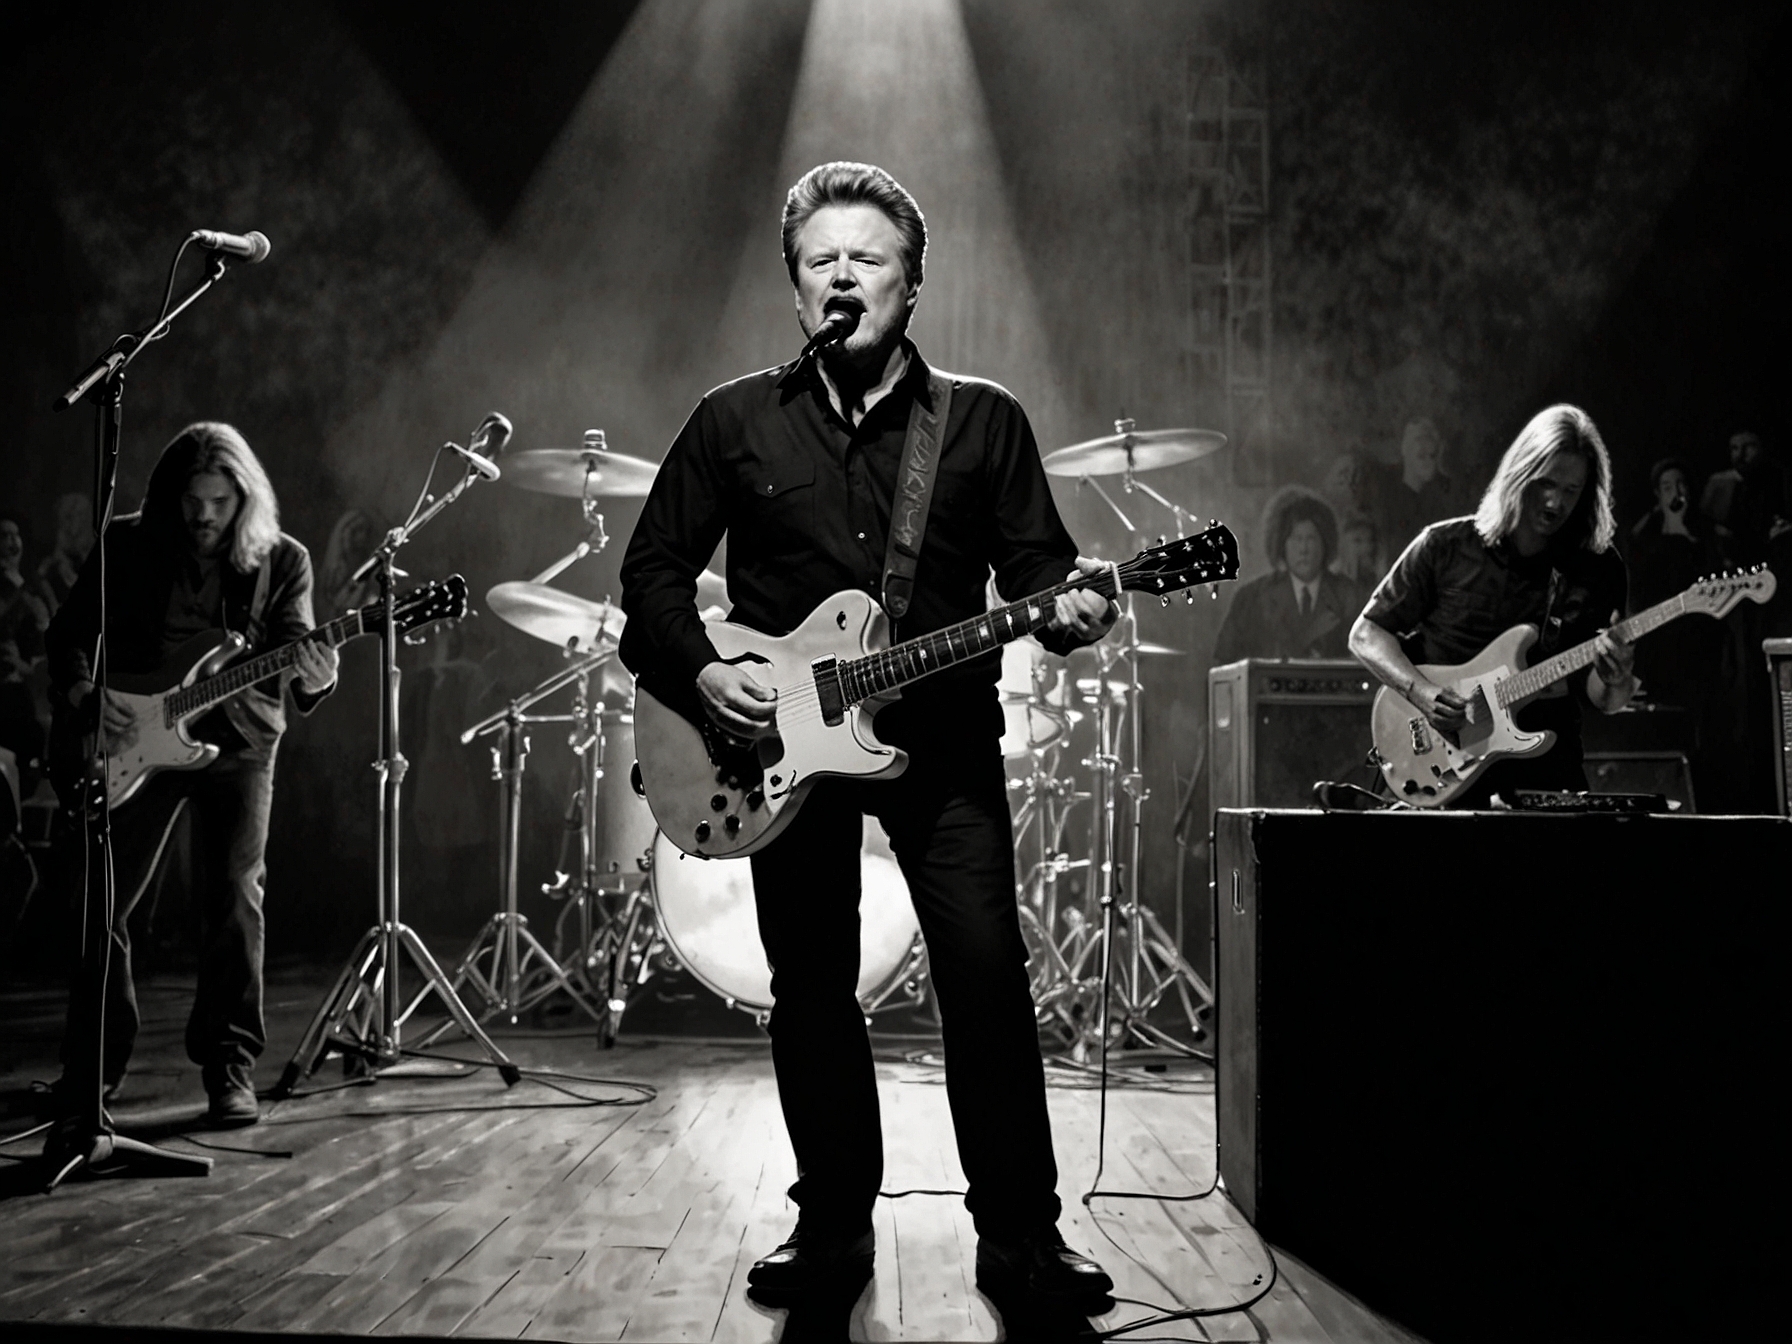 Don Henley on stage with the Eagles, capturing the legendary moment as they perform 'Hotel California,' highlighting his connection to the iconic song and his quest to reclaim the original notes and lyrics.